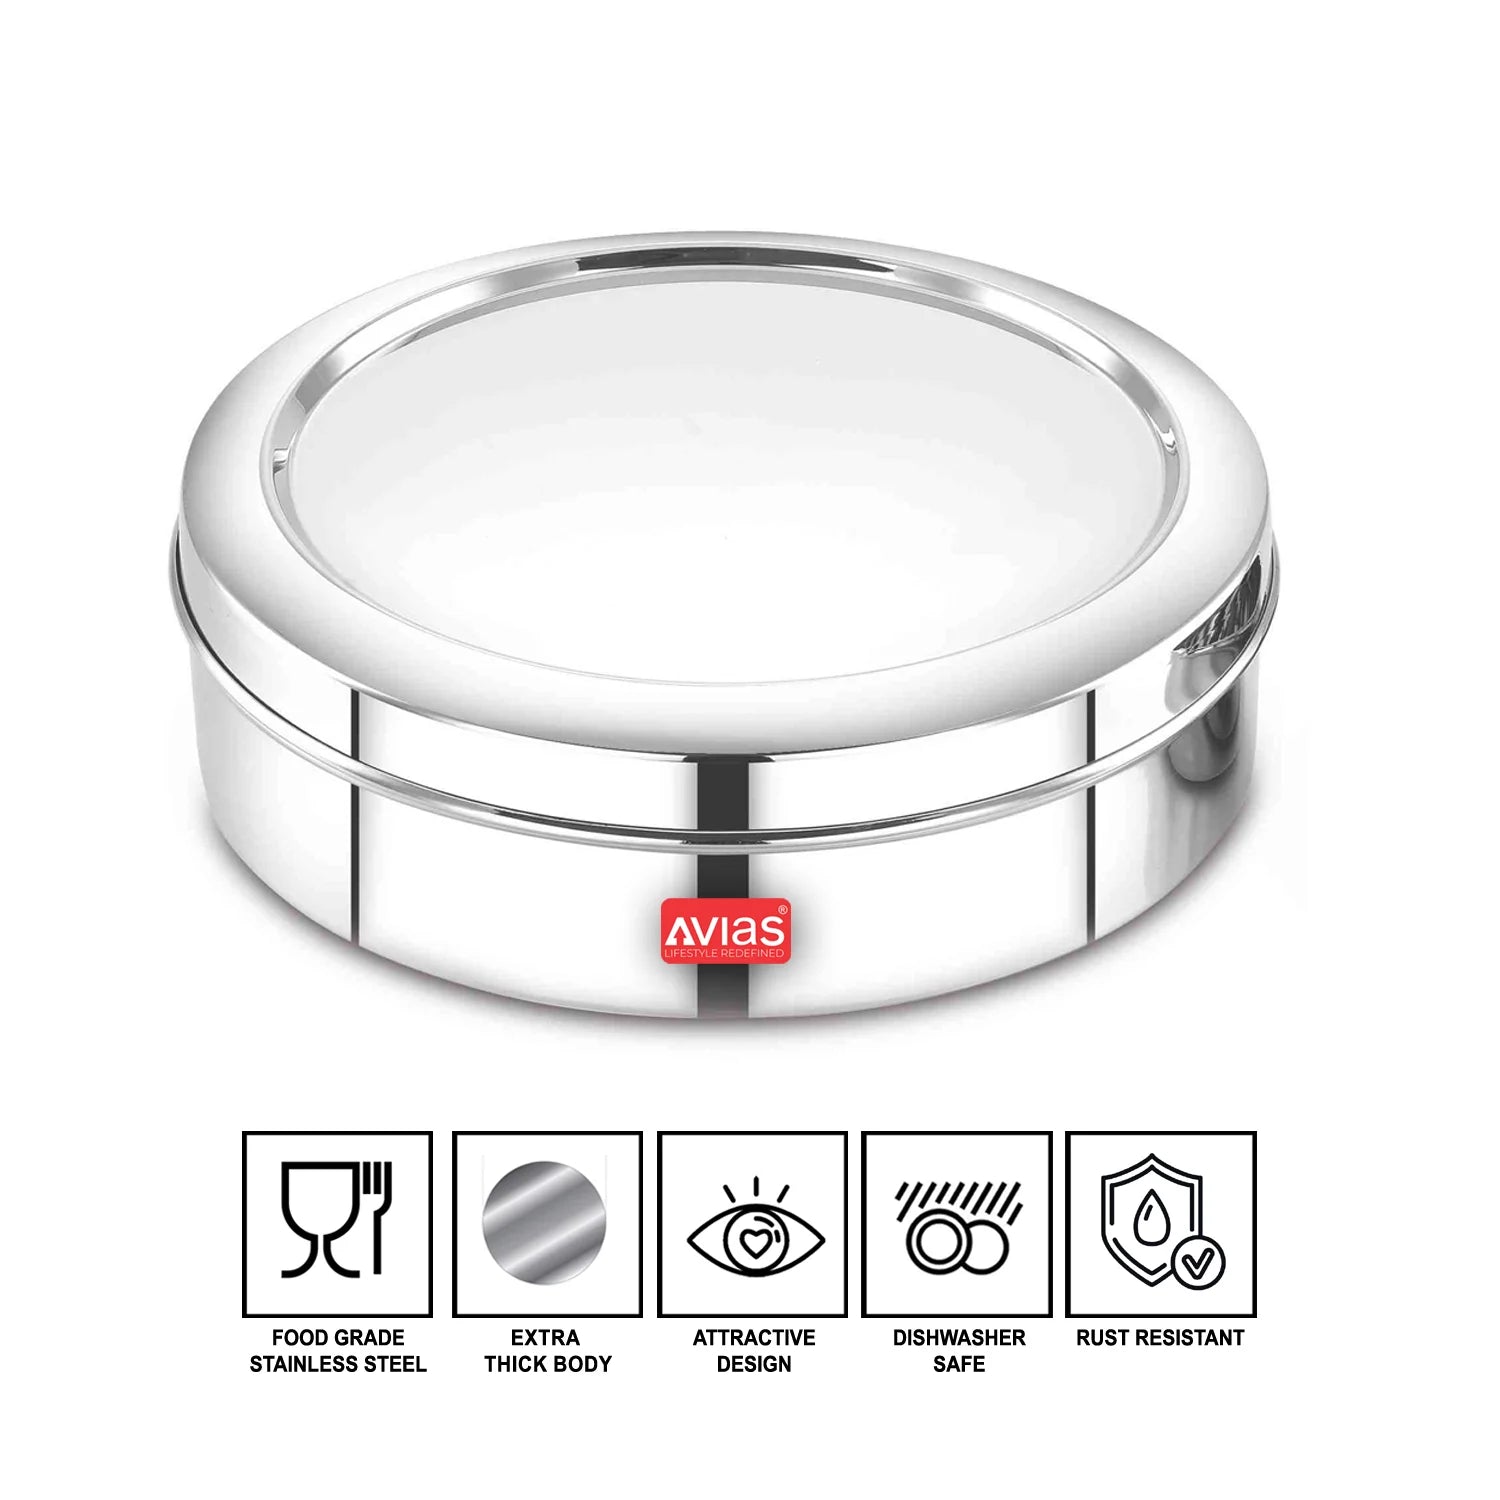 AVIAS Stainless Steel Elegant Spice box features